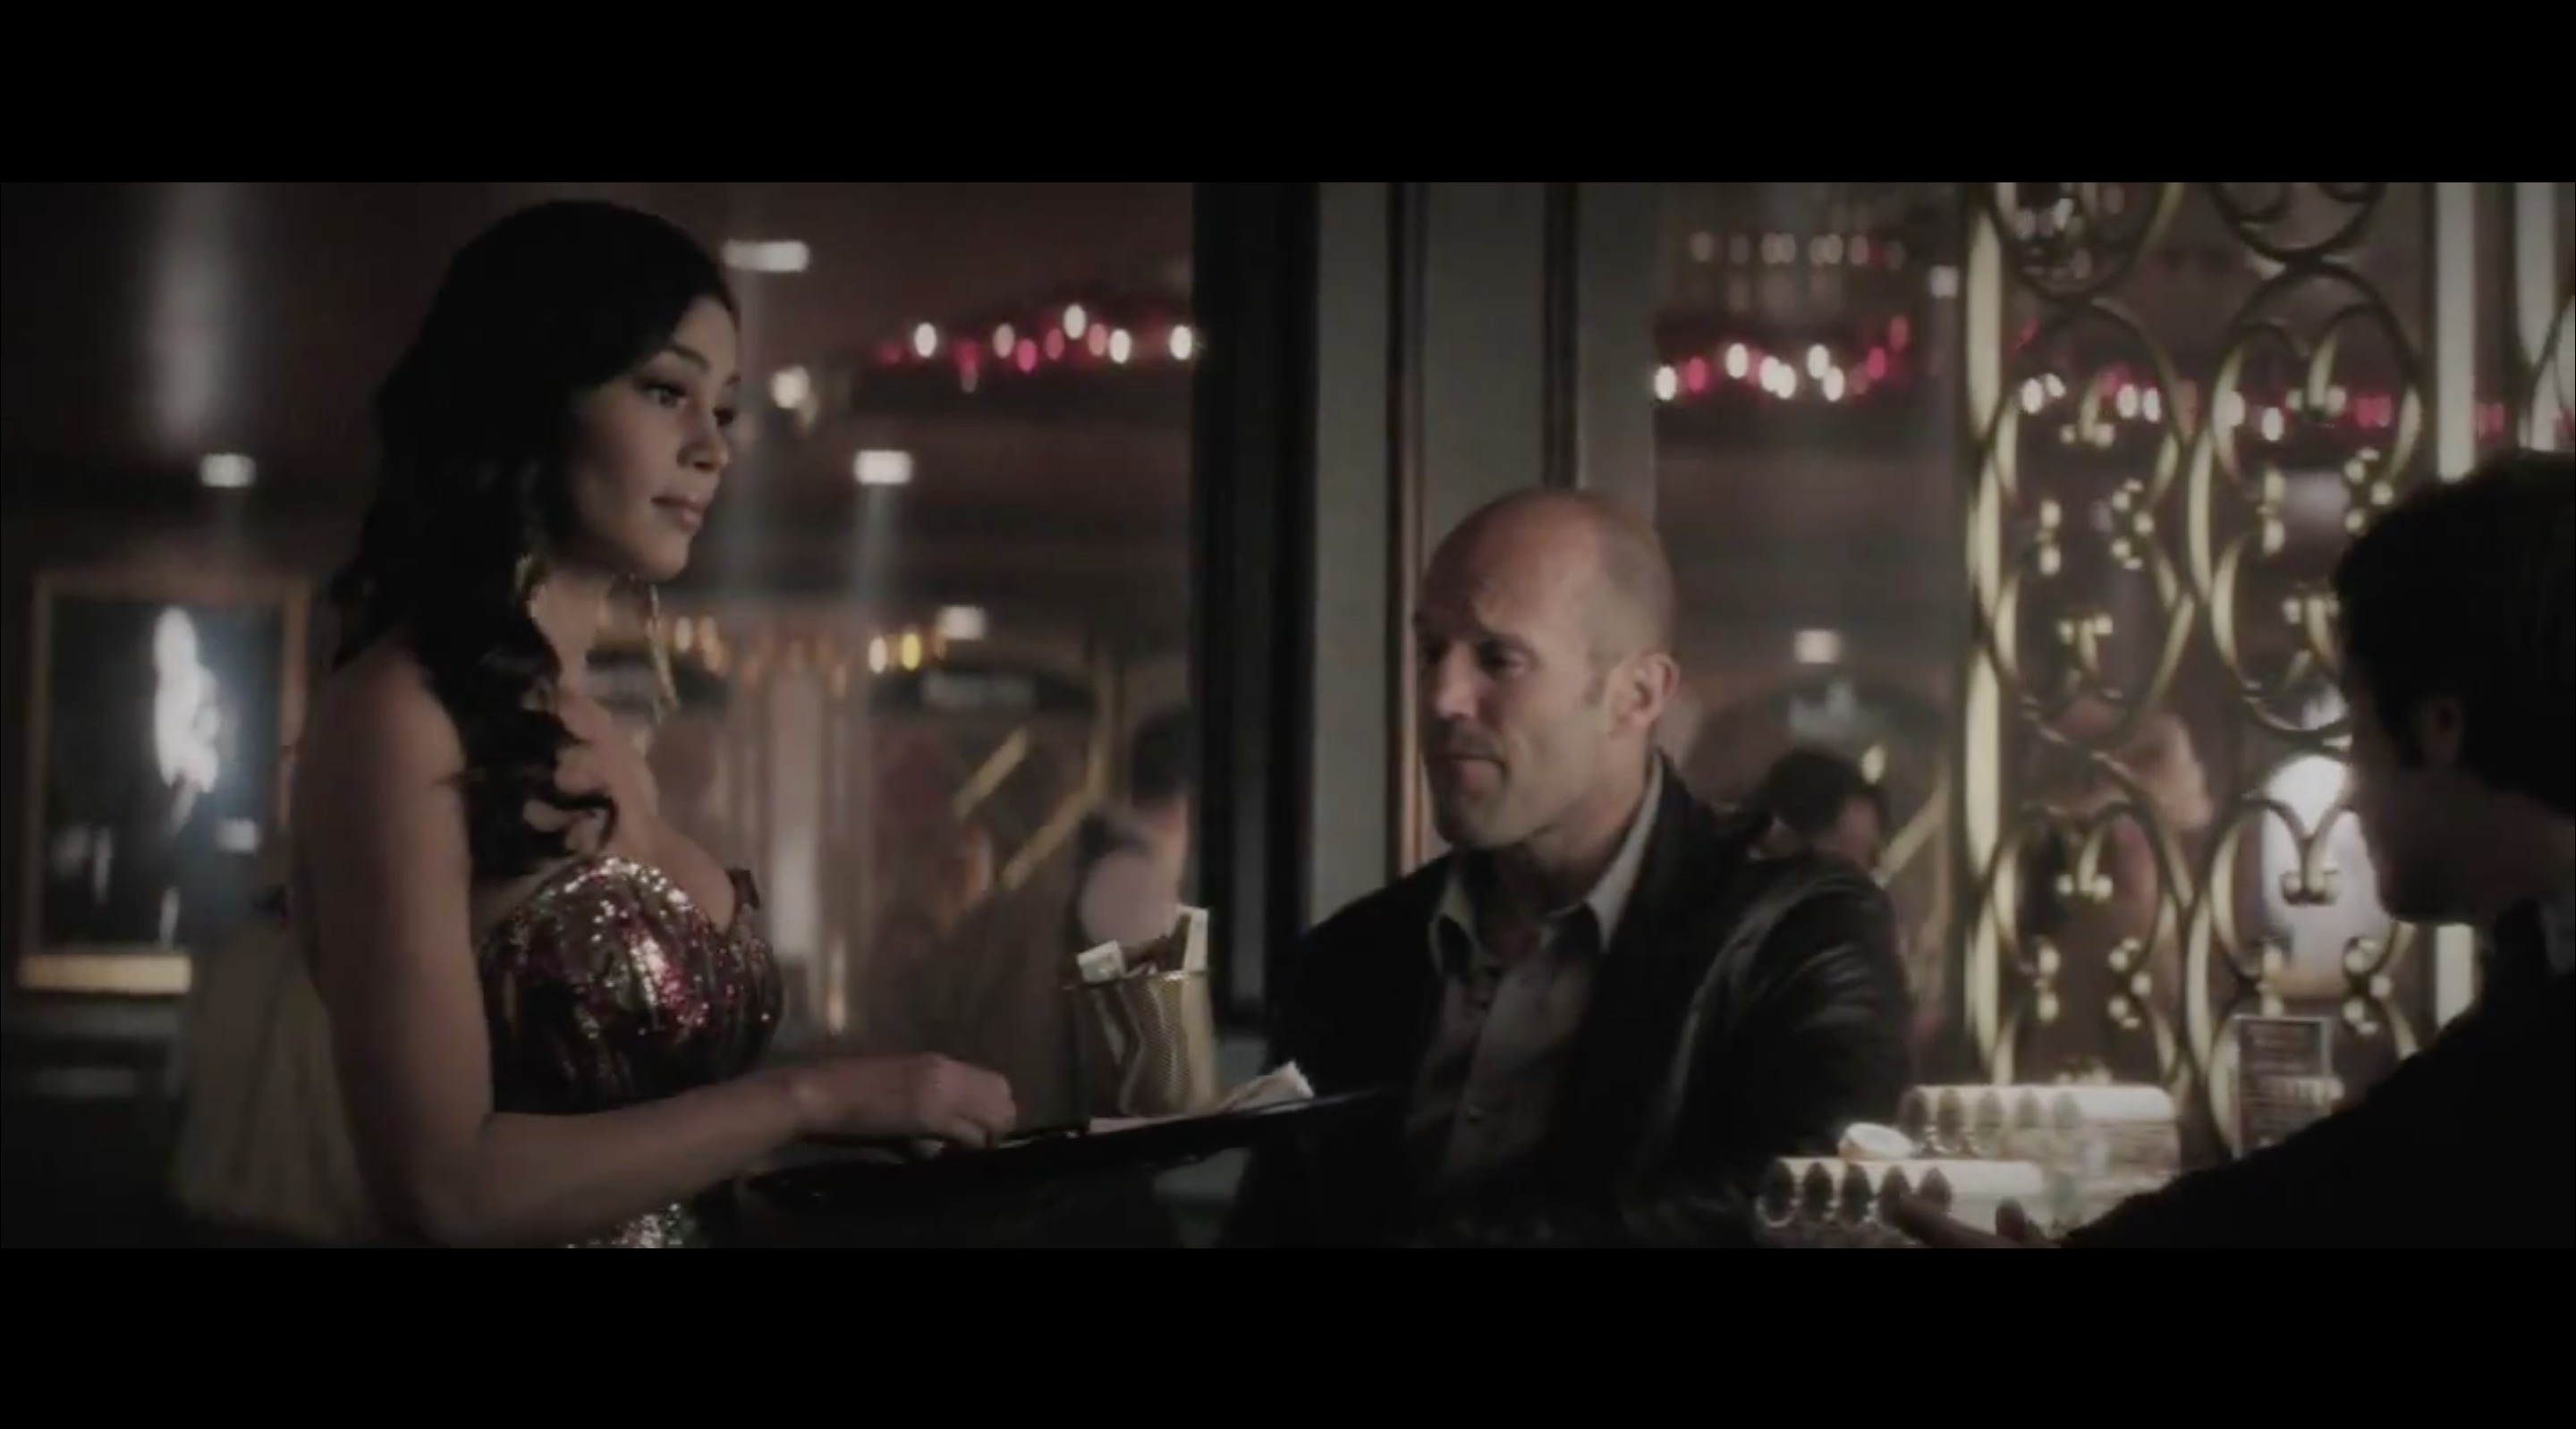 Screen shot from movie Wild Card with Jason Statham and Michael Angarano